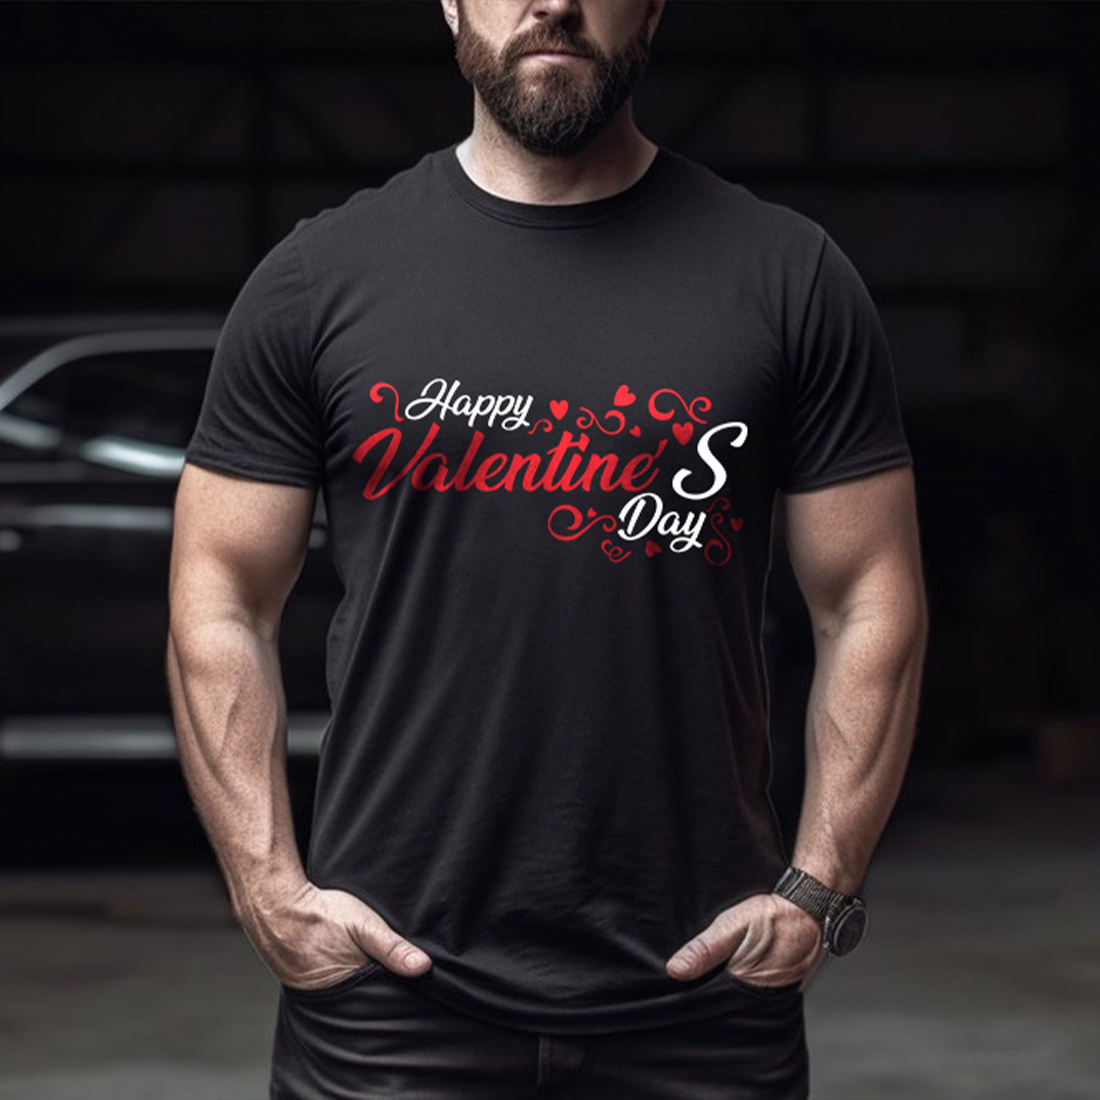 Valentines Day Gym Top With Support